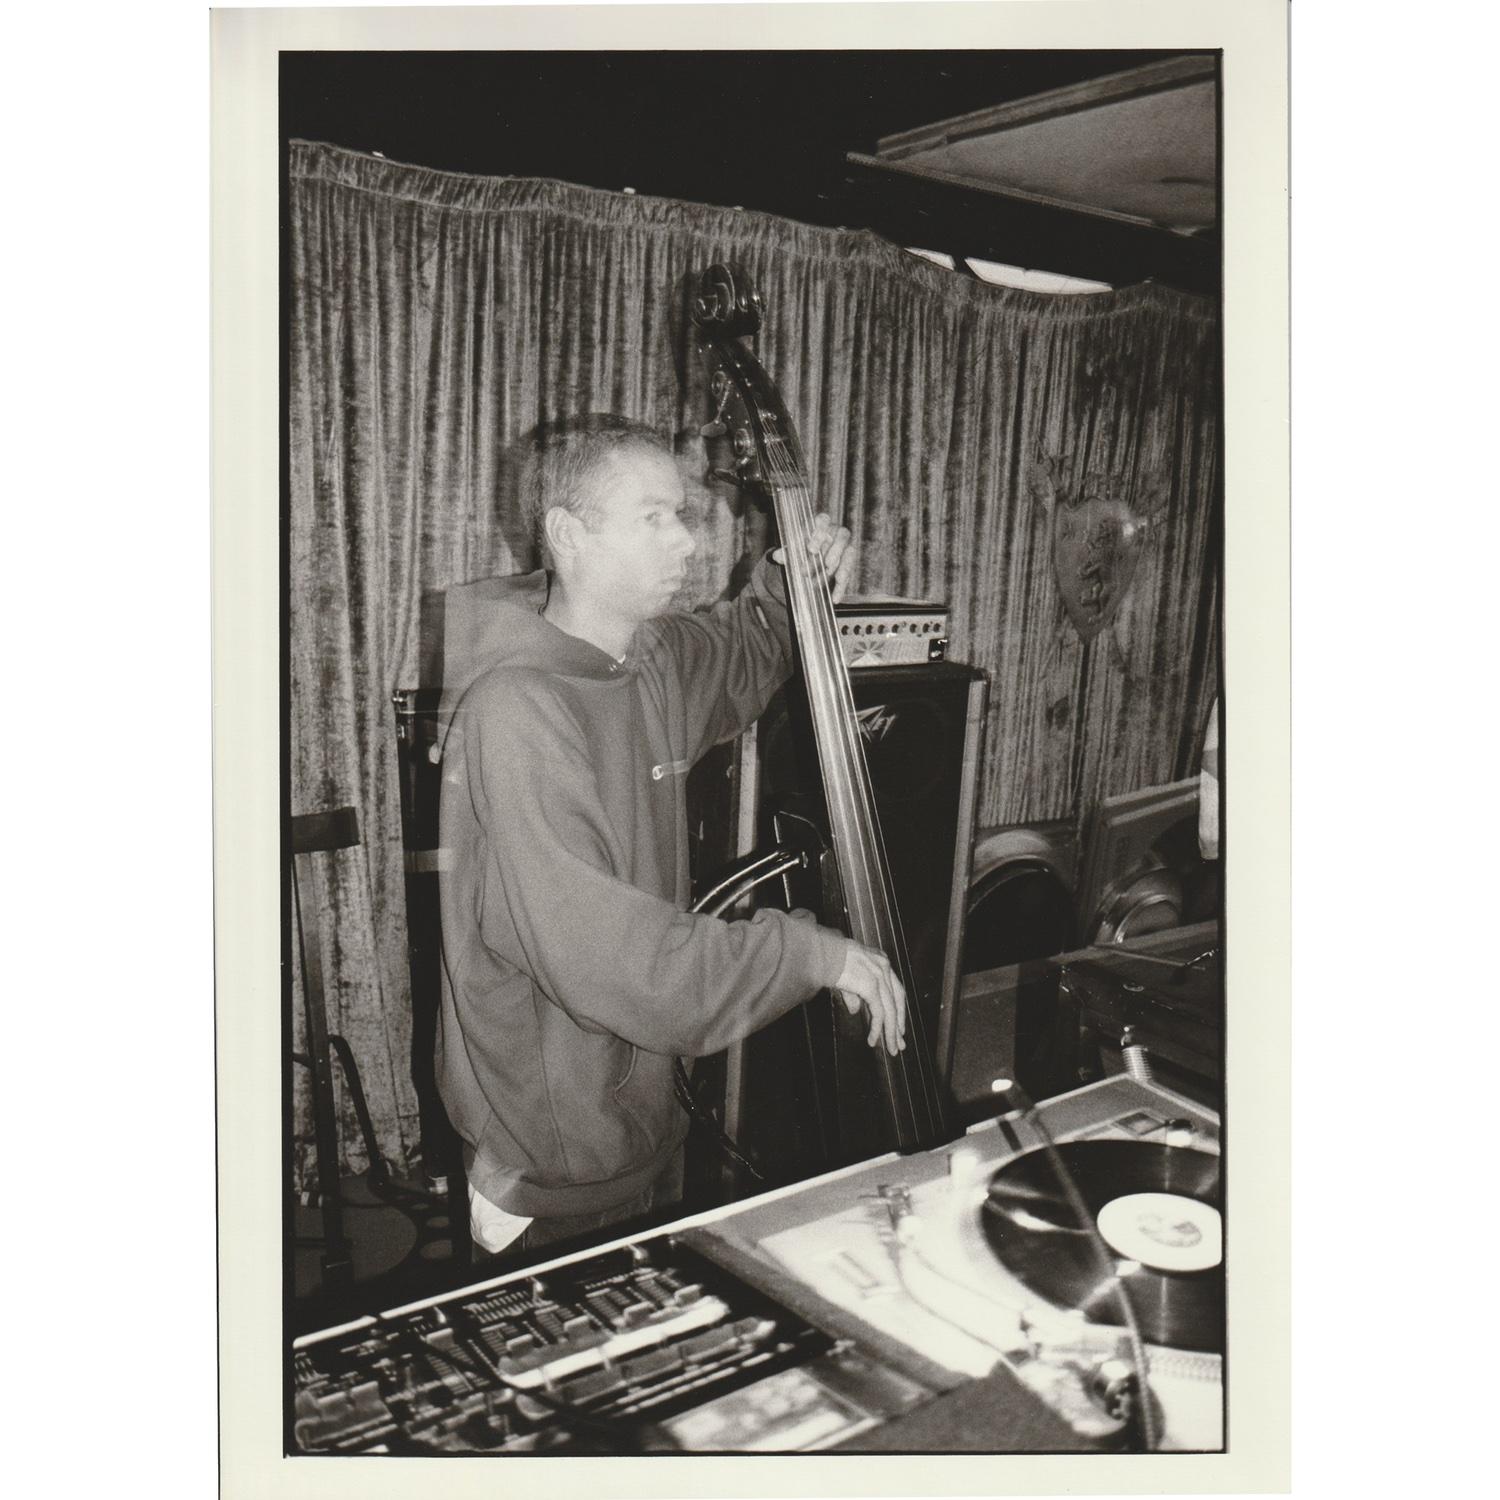 Original hand-printed vintage print from photographer Jake Chessum of Beastie Boys Adam Yauch, know as MCA, playing double bass in the studio in 1994. 

Printed by Jake back in the day, signed, dated and titled on the back in pencil.

Print measures